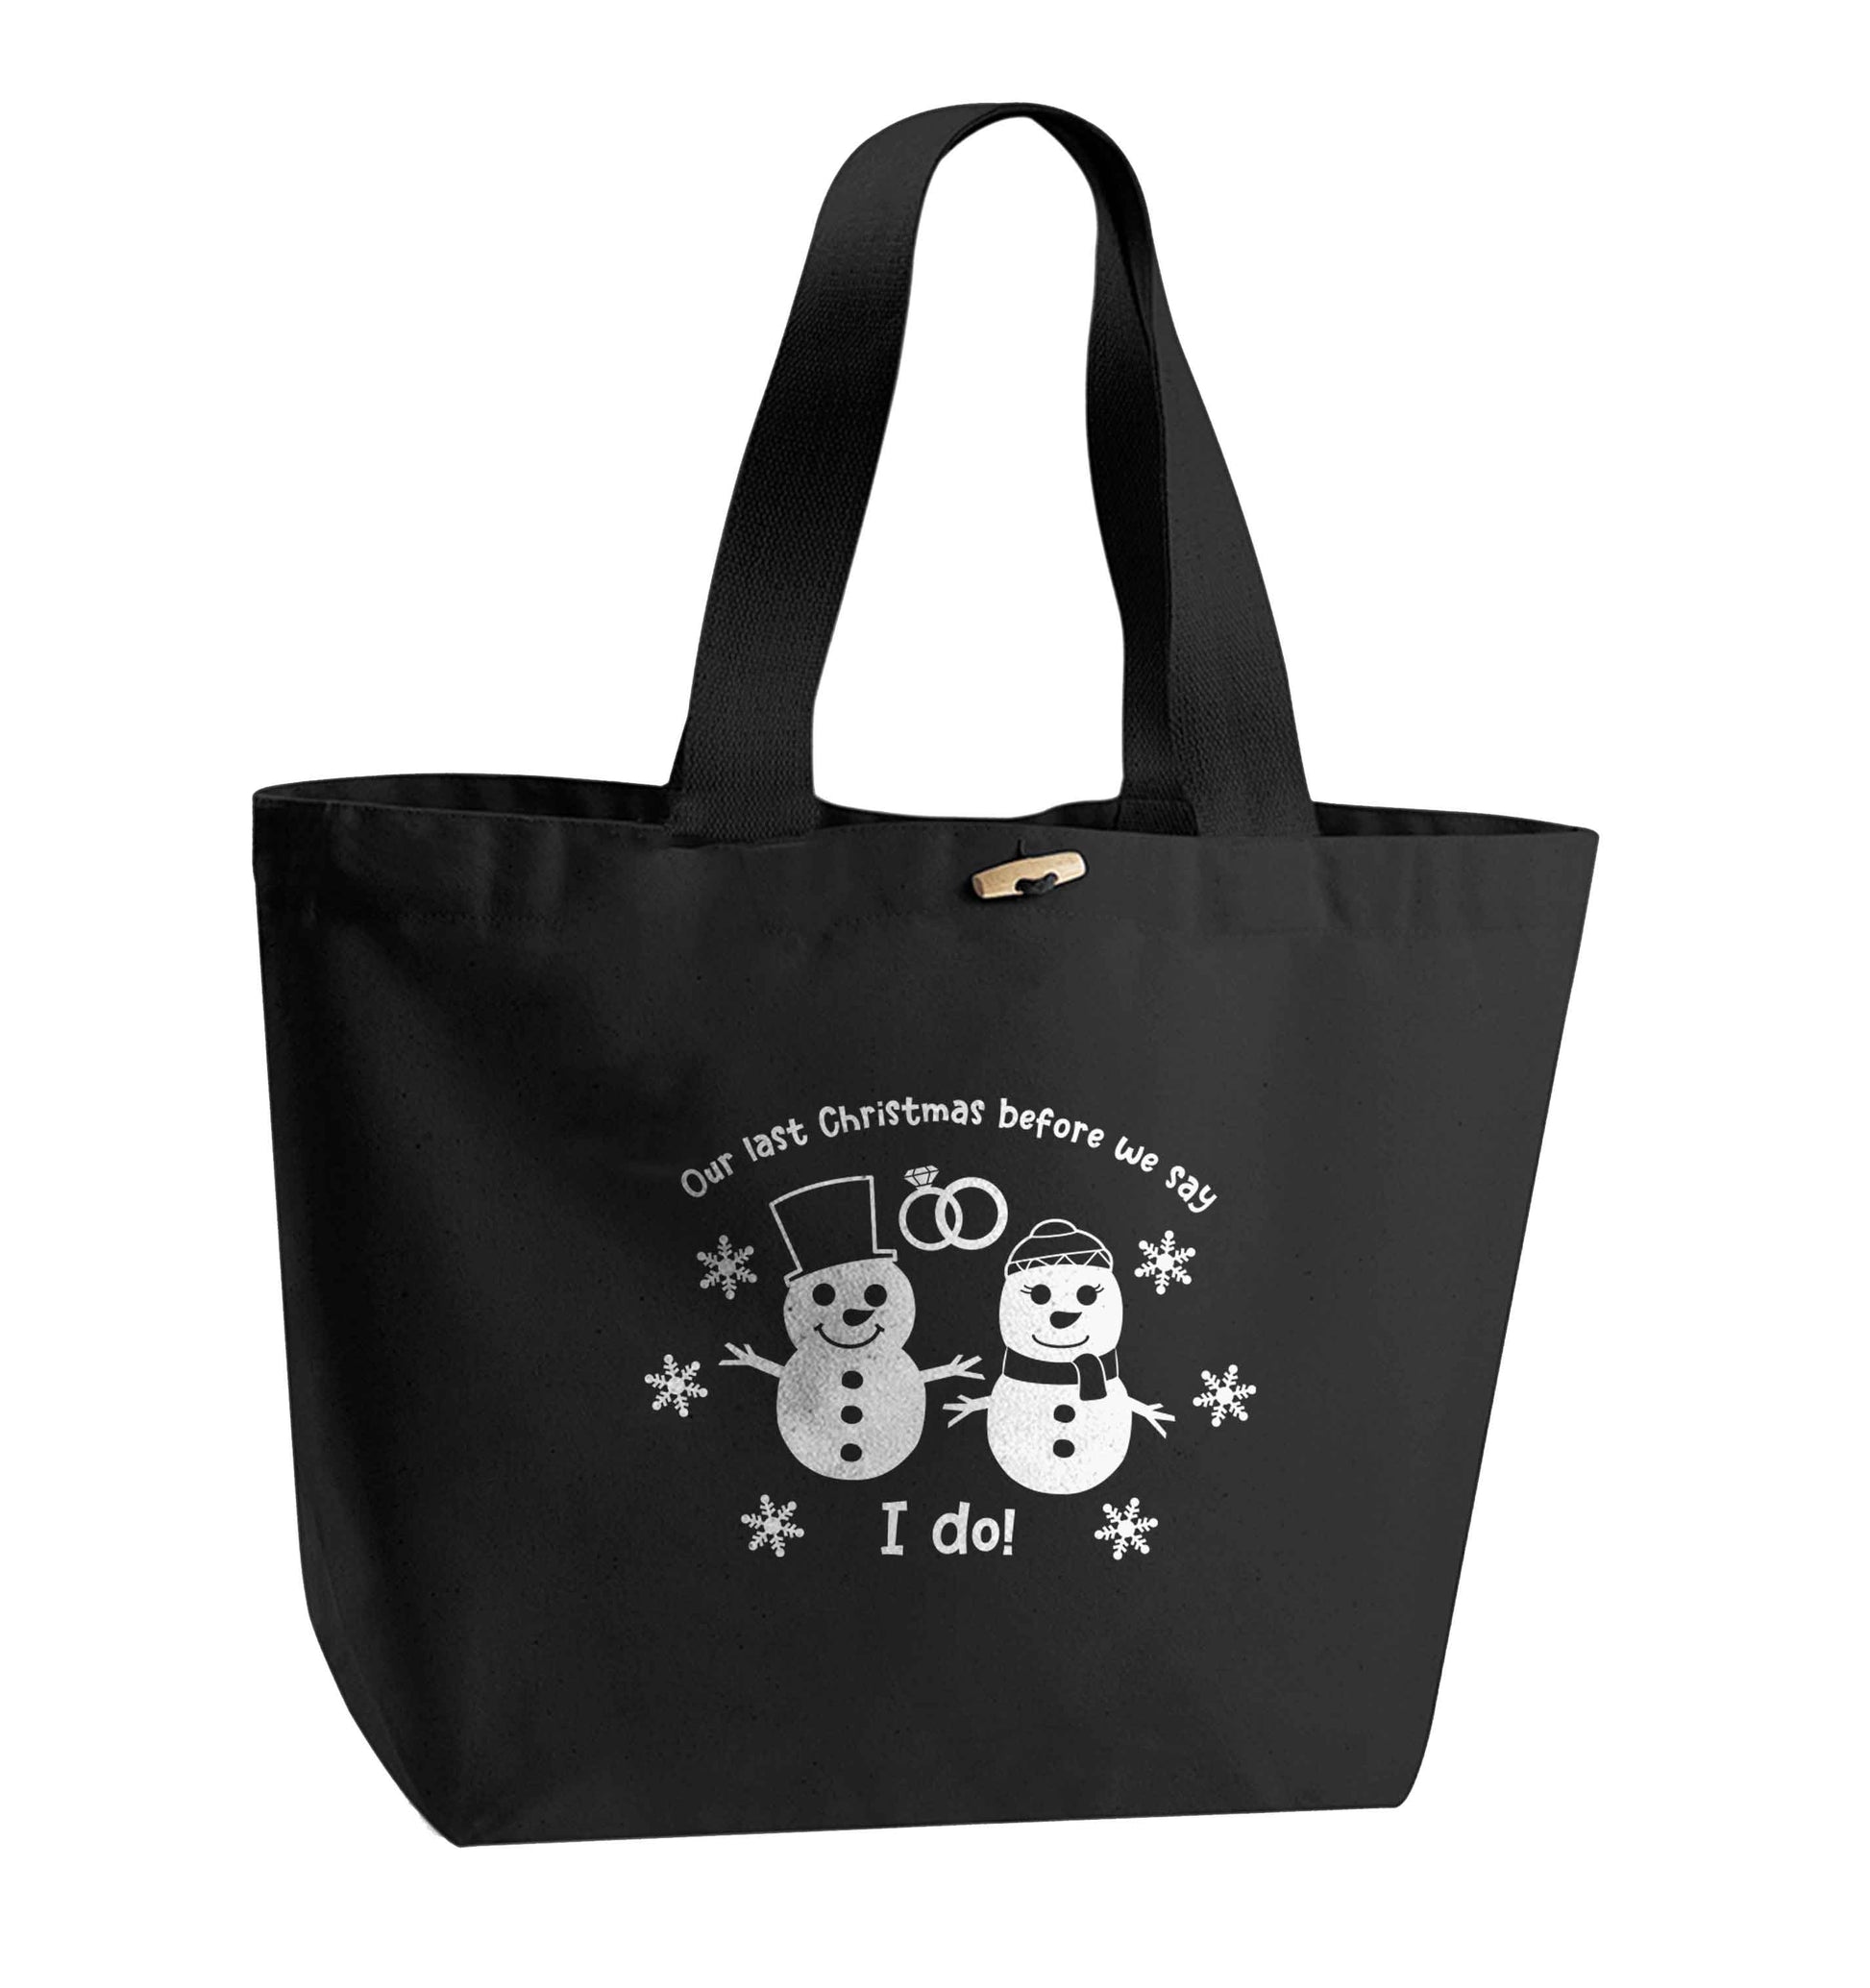 Last Christmas before we say I do organic cotton premium tote bag with wooden toggle in black